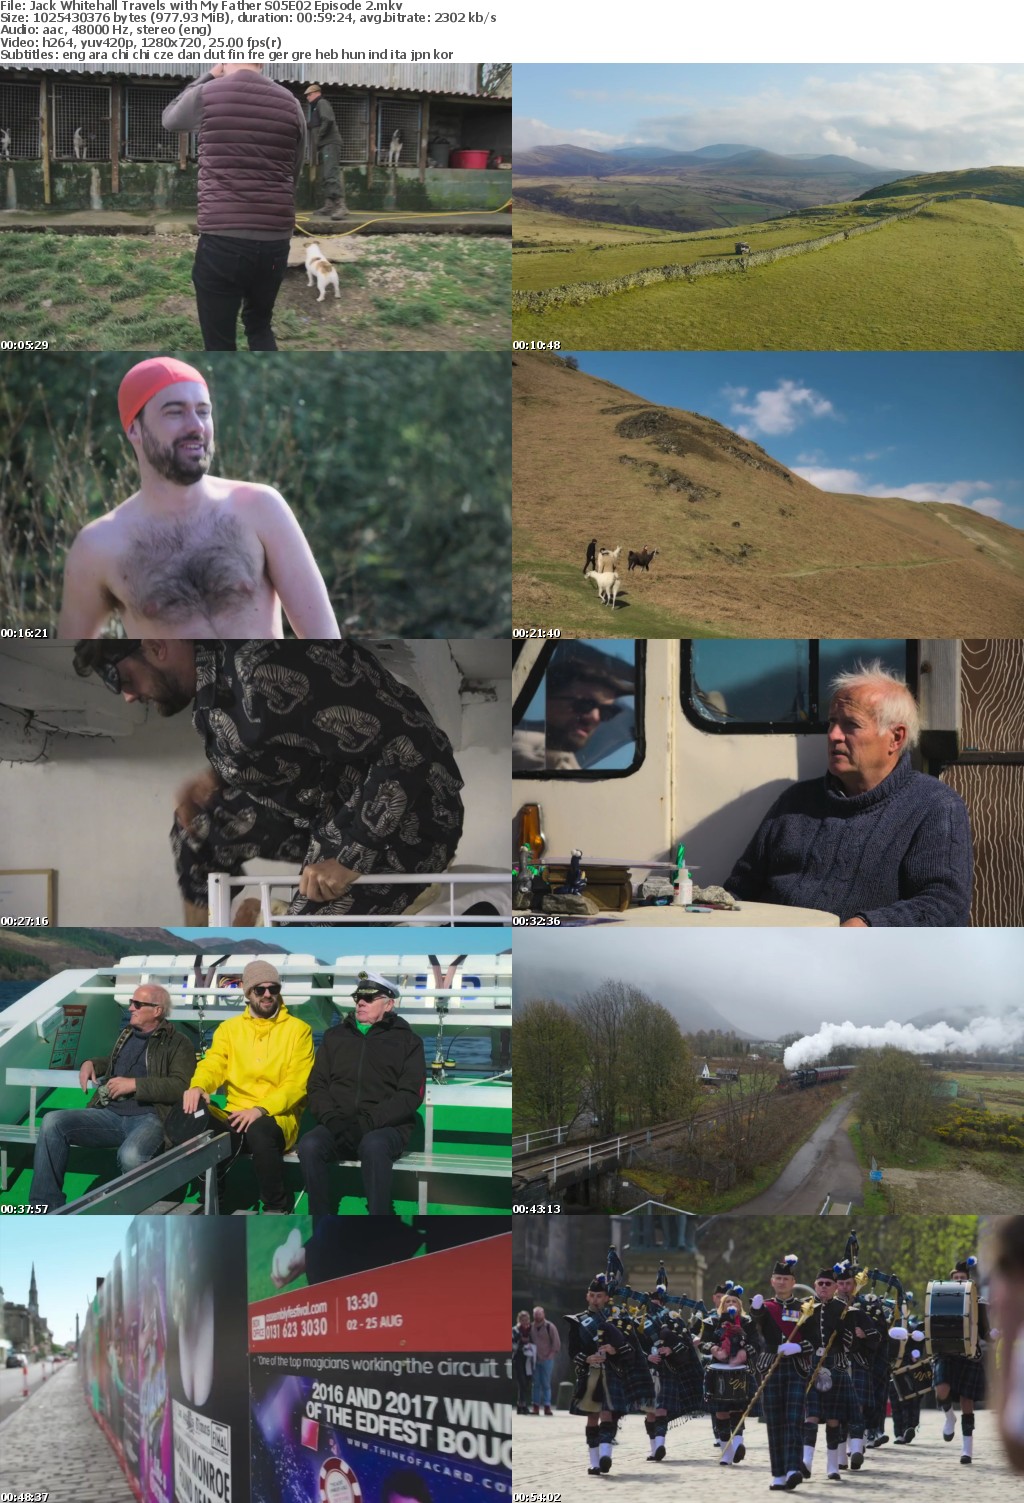 Jack Whitehall Travels With My Father 2017 Season 5 Complete 720p NF WEBRip x264 i c